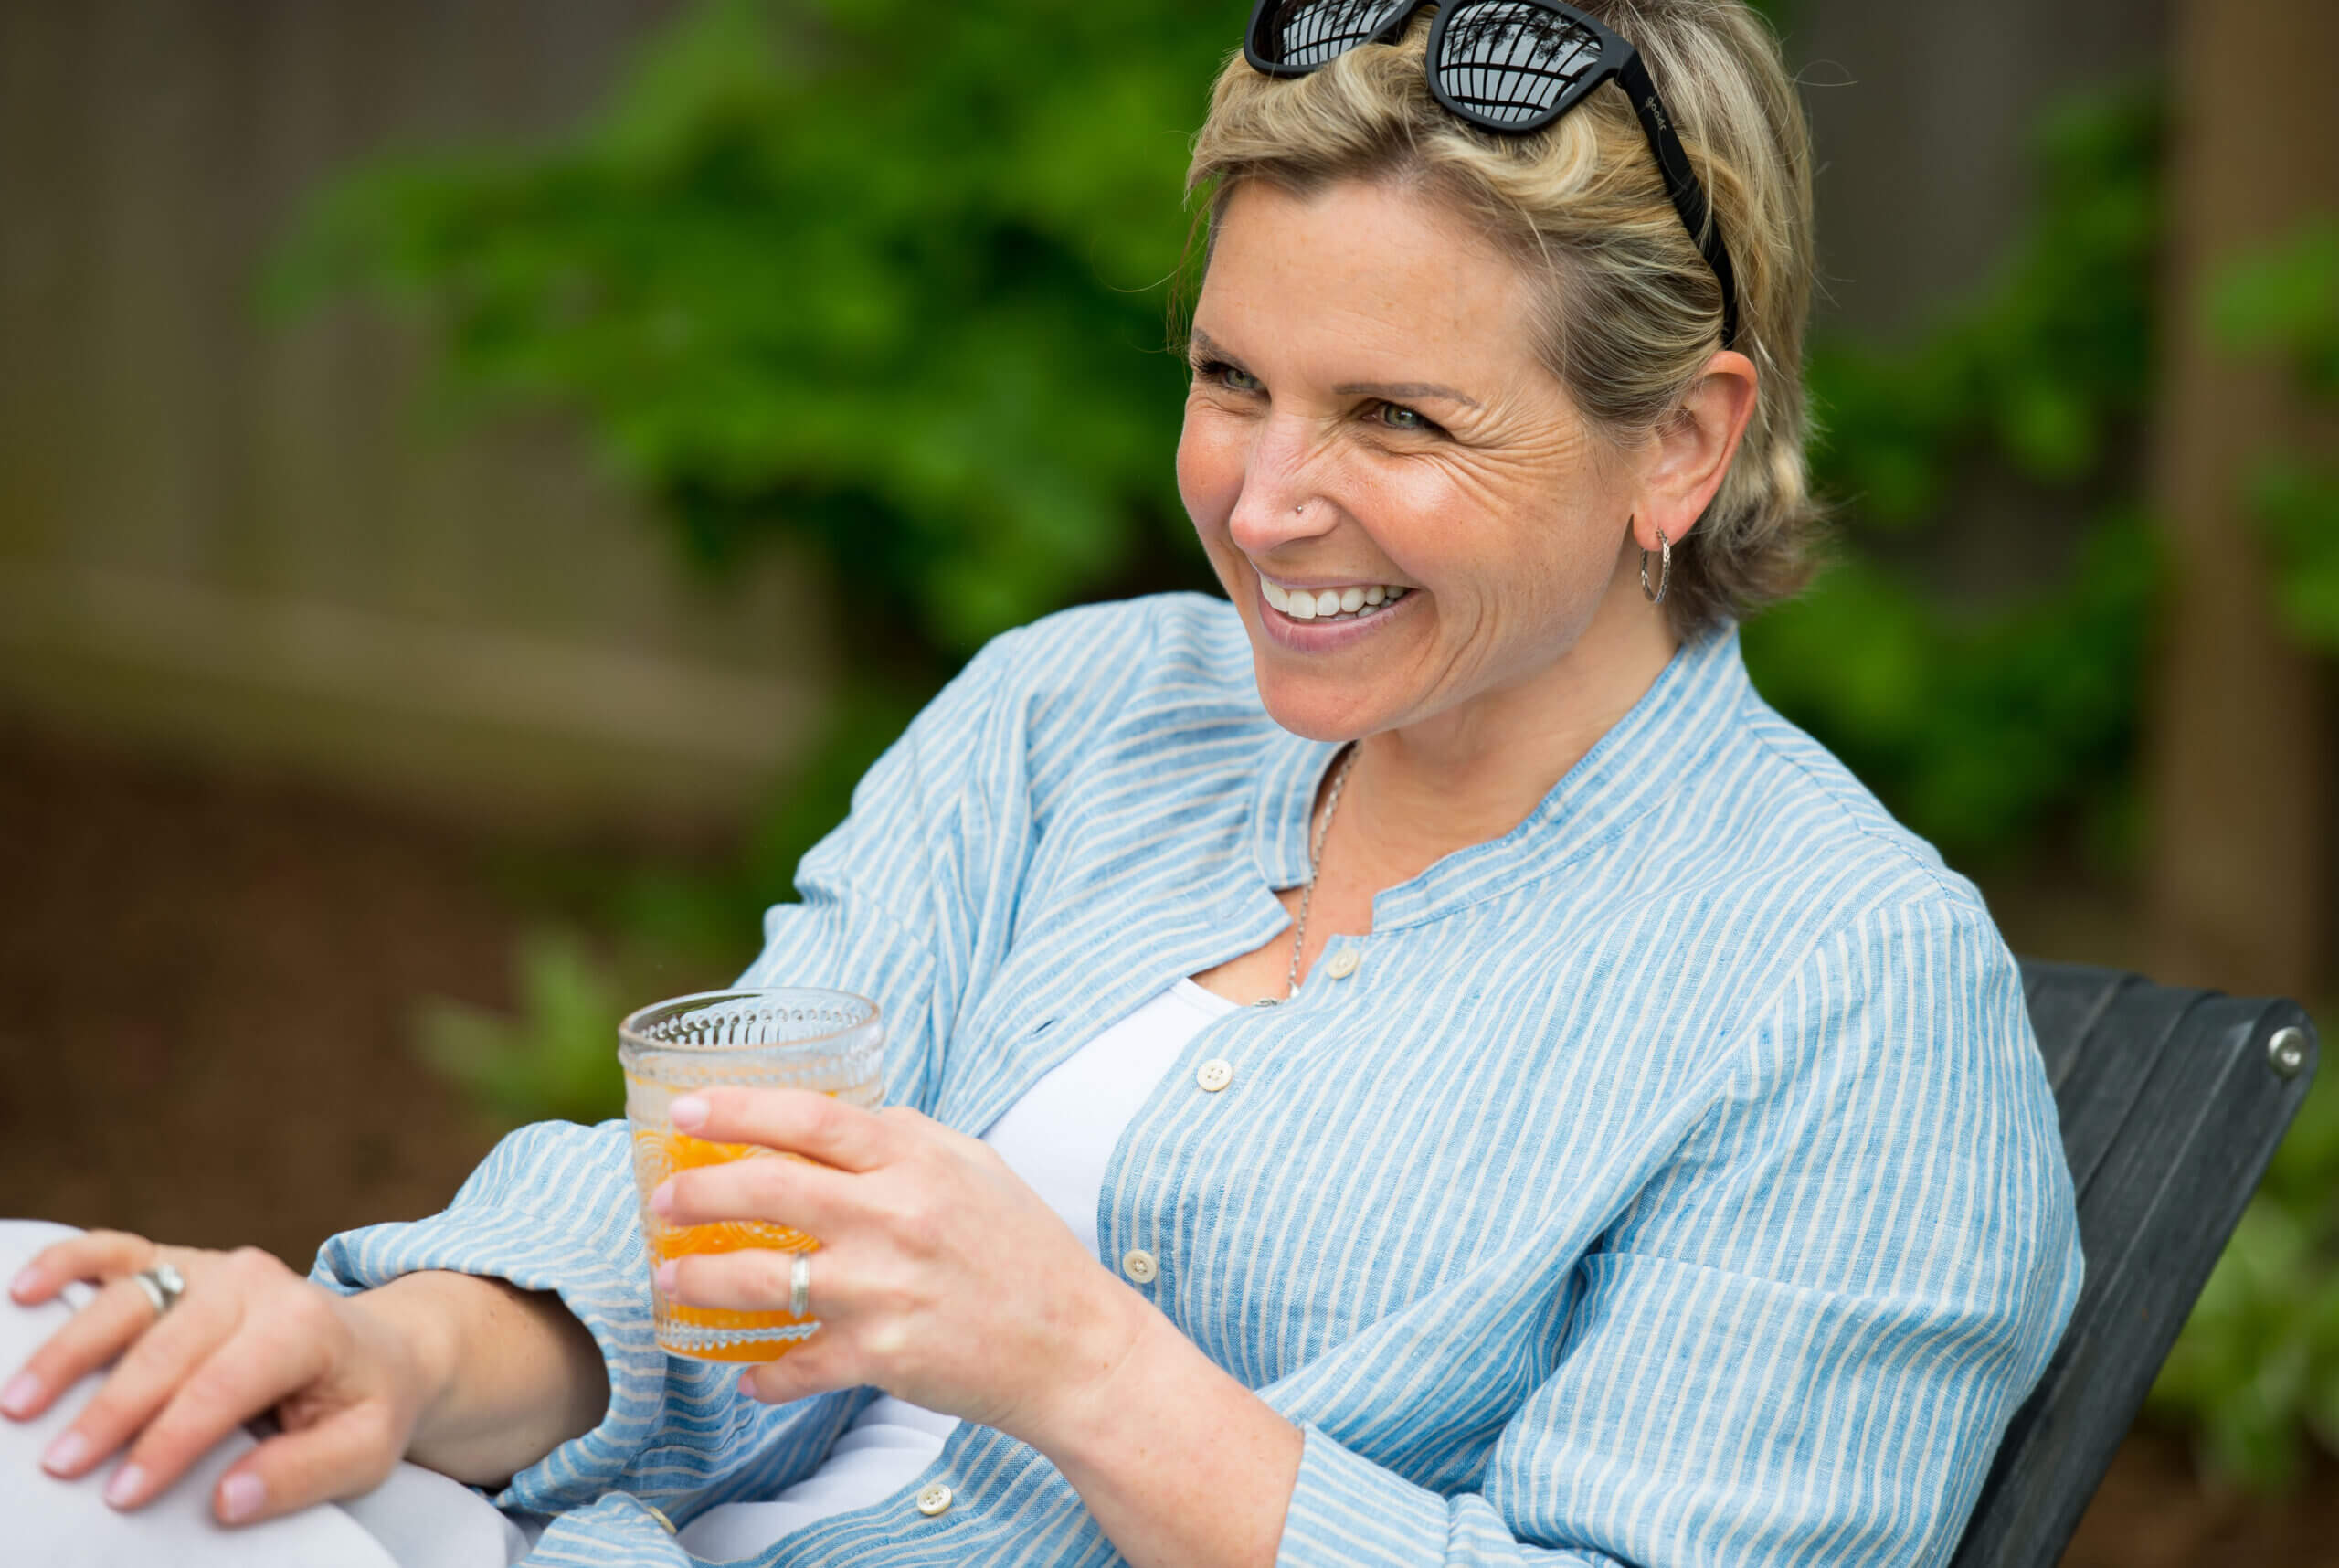 Color image of a while woman with short blond hair sitting with a smile and a glass in her left hand.